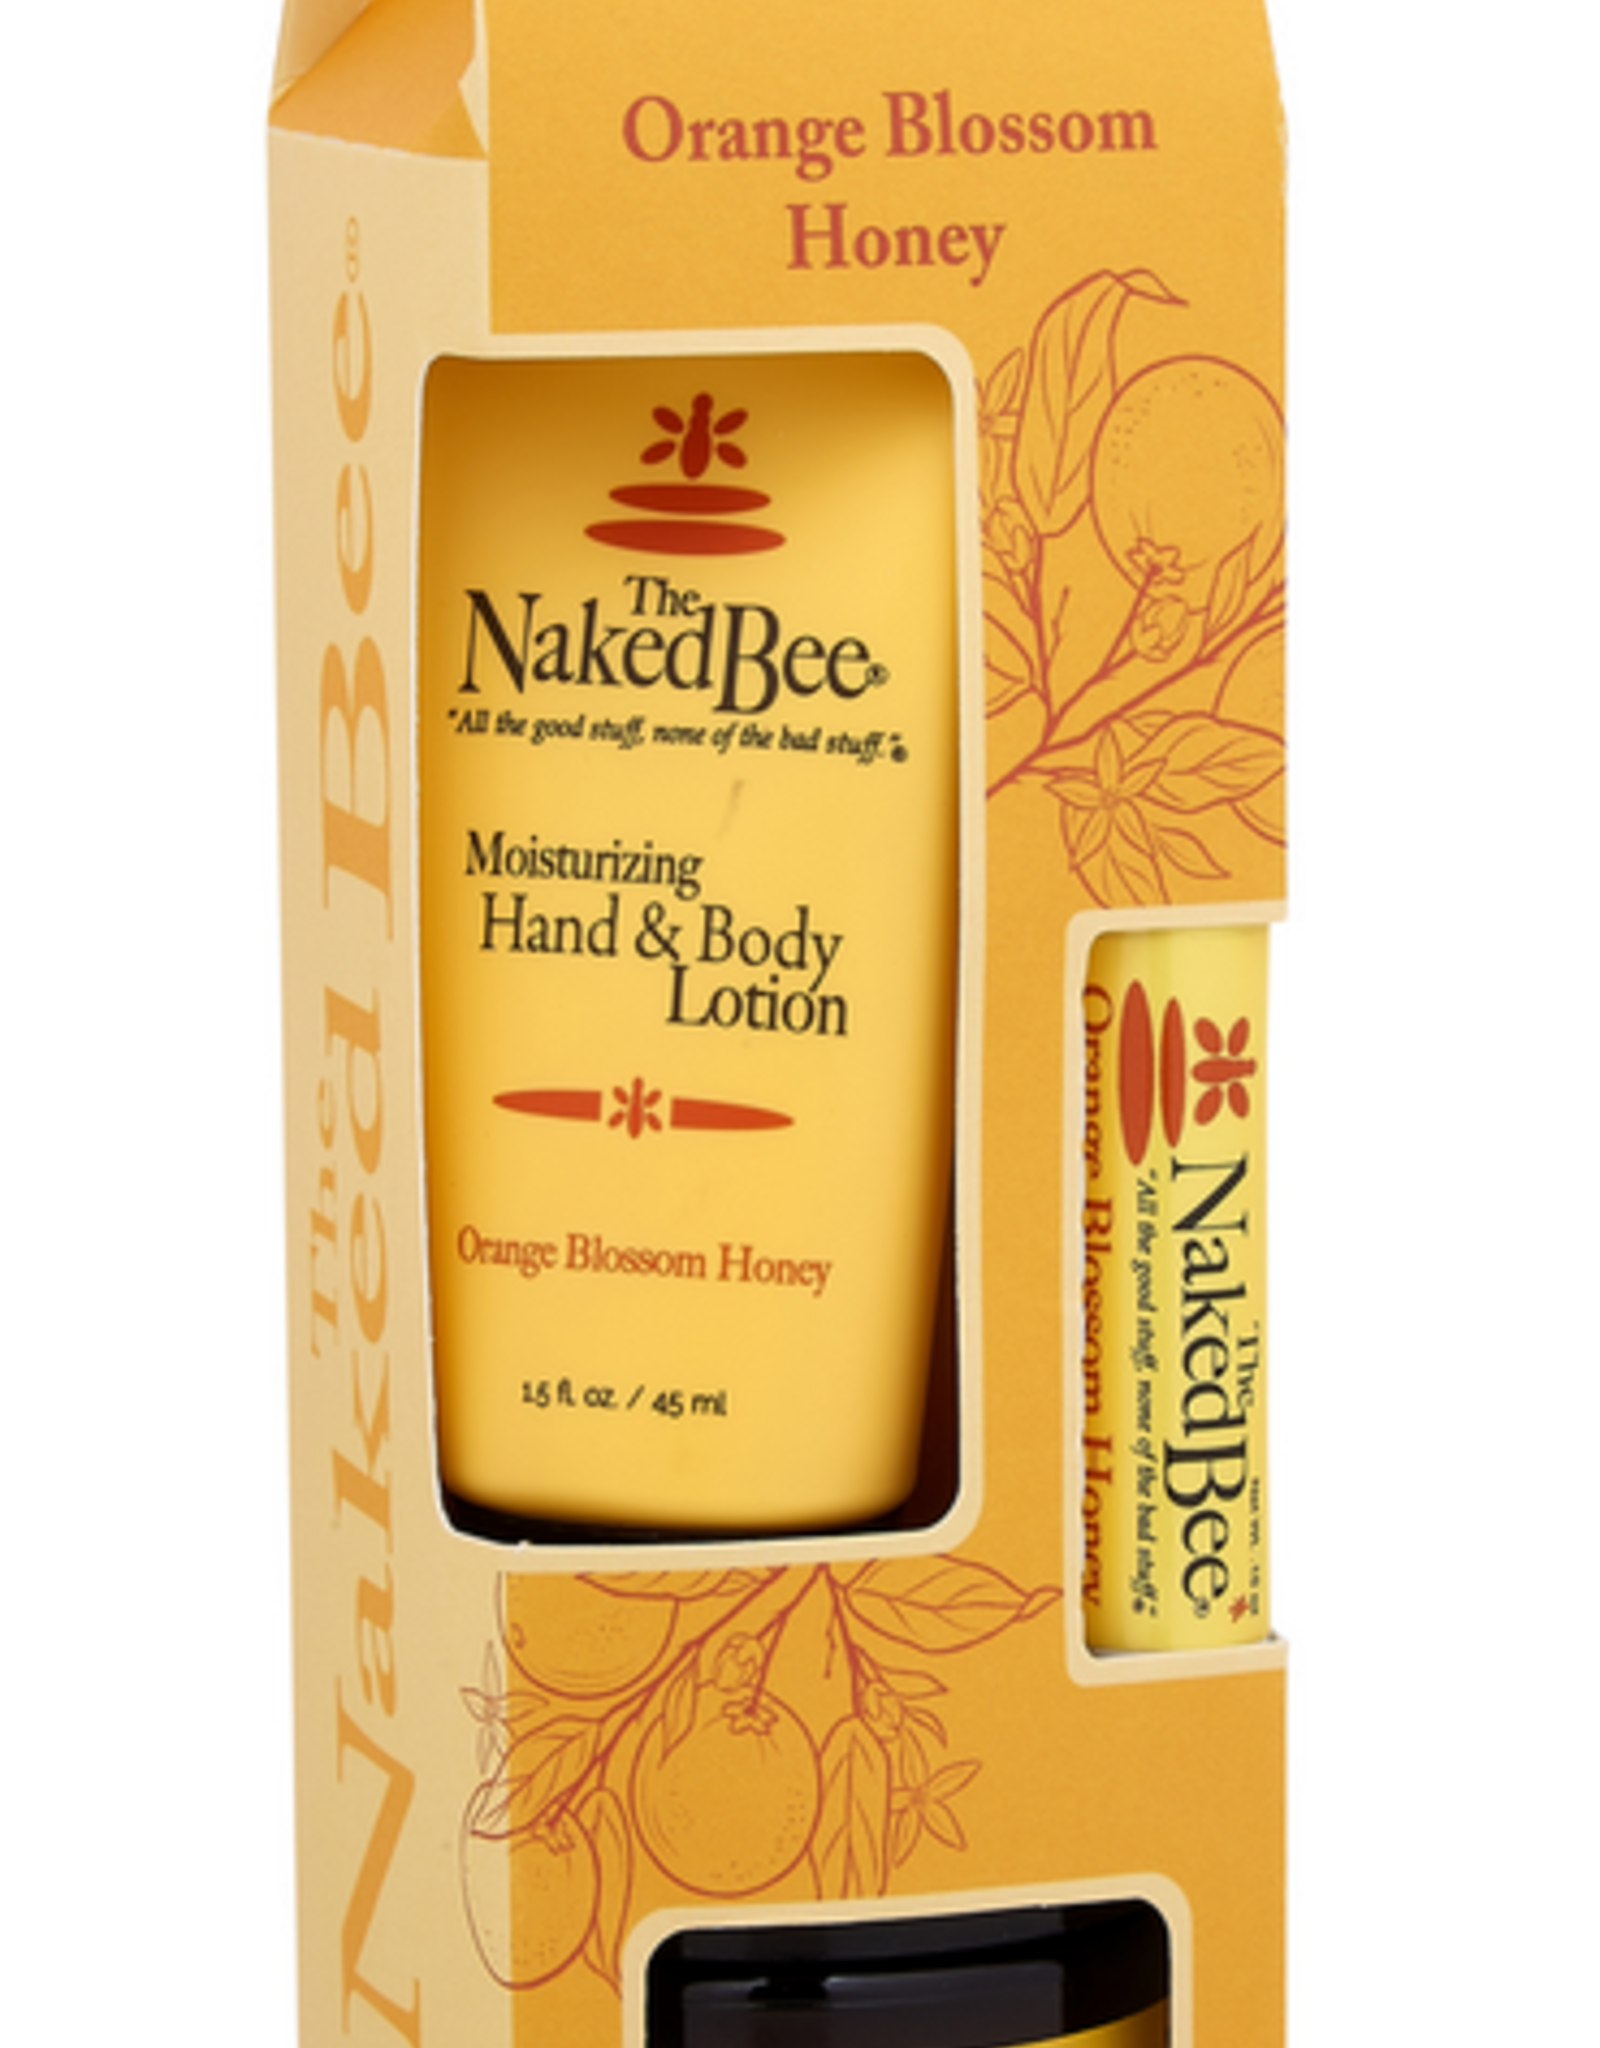 Naked Bee CONTEMPORARY Orange Blossom Honey Gift Collection